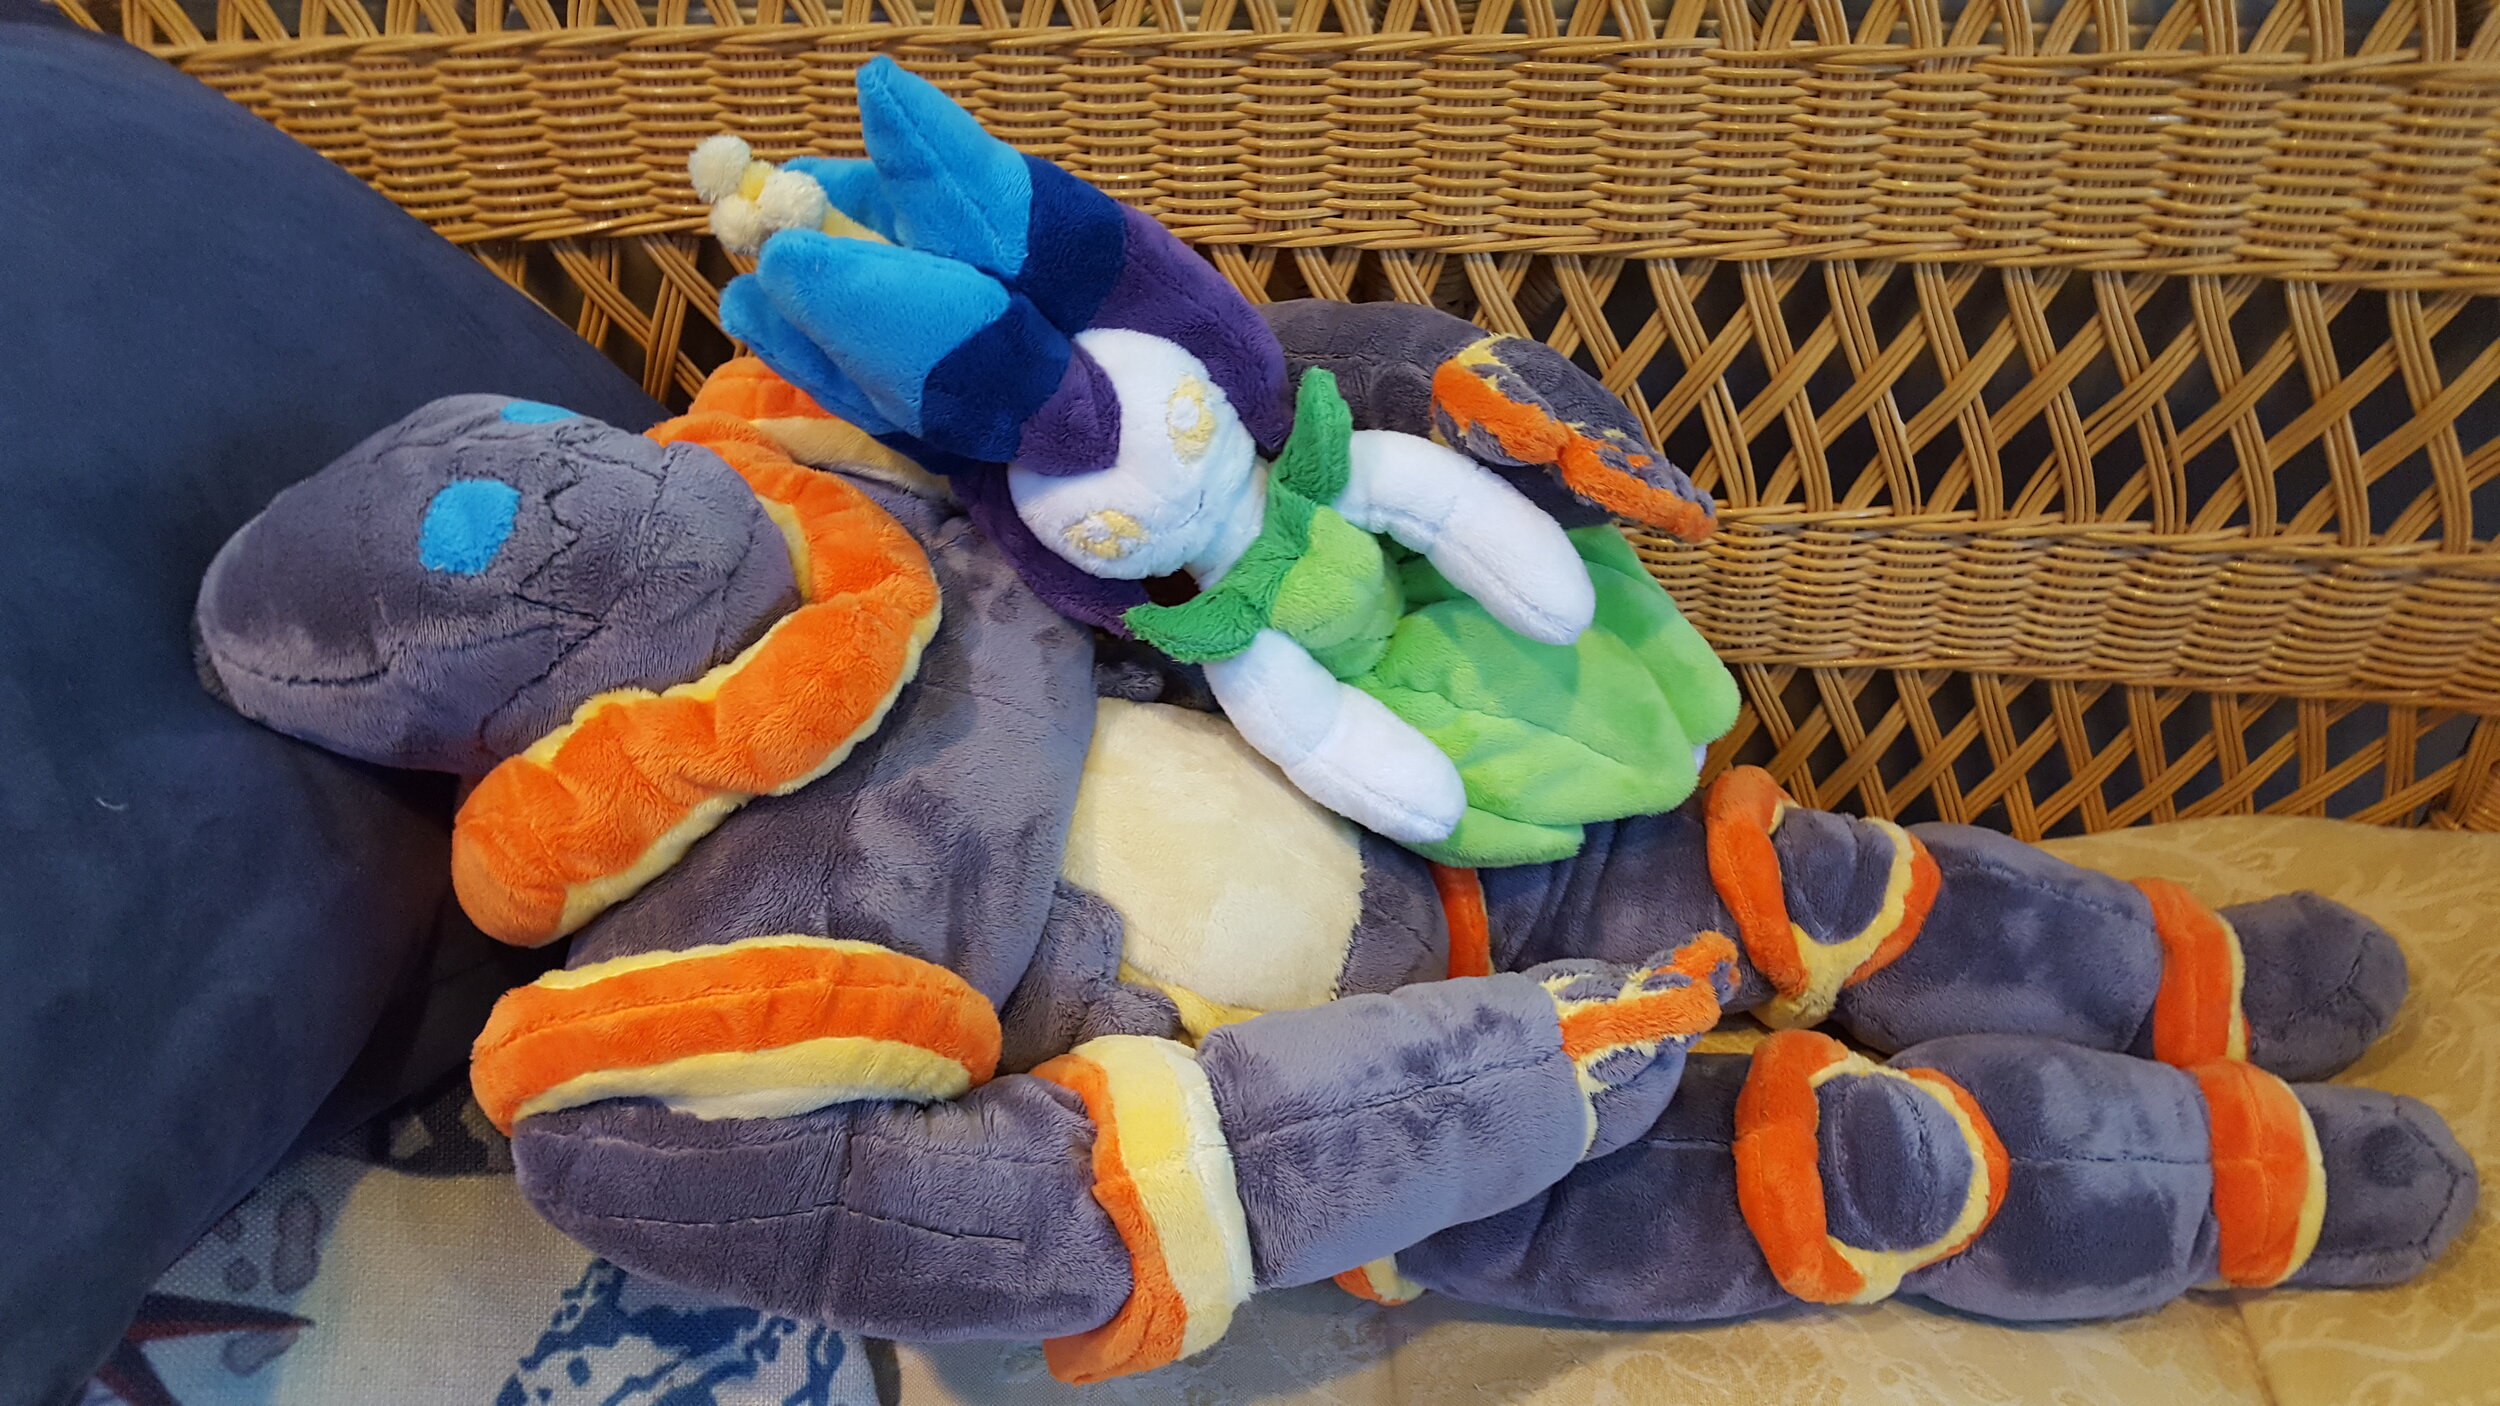 Igneous and Nettle Plushes Lying